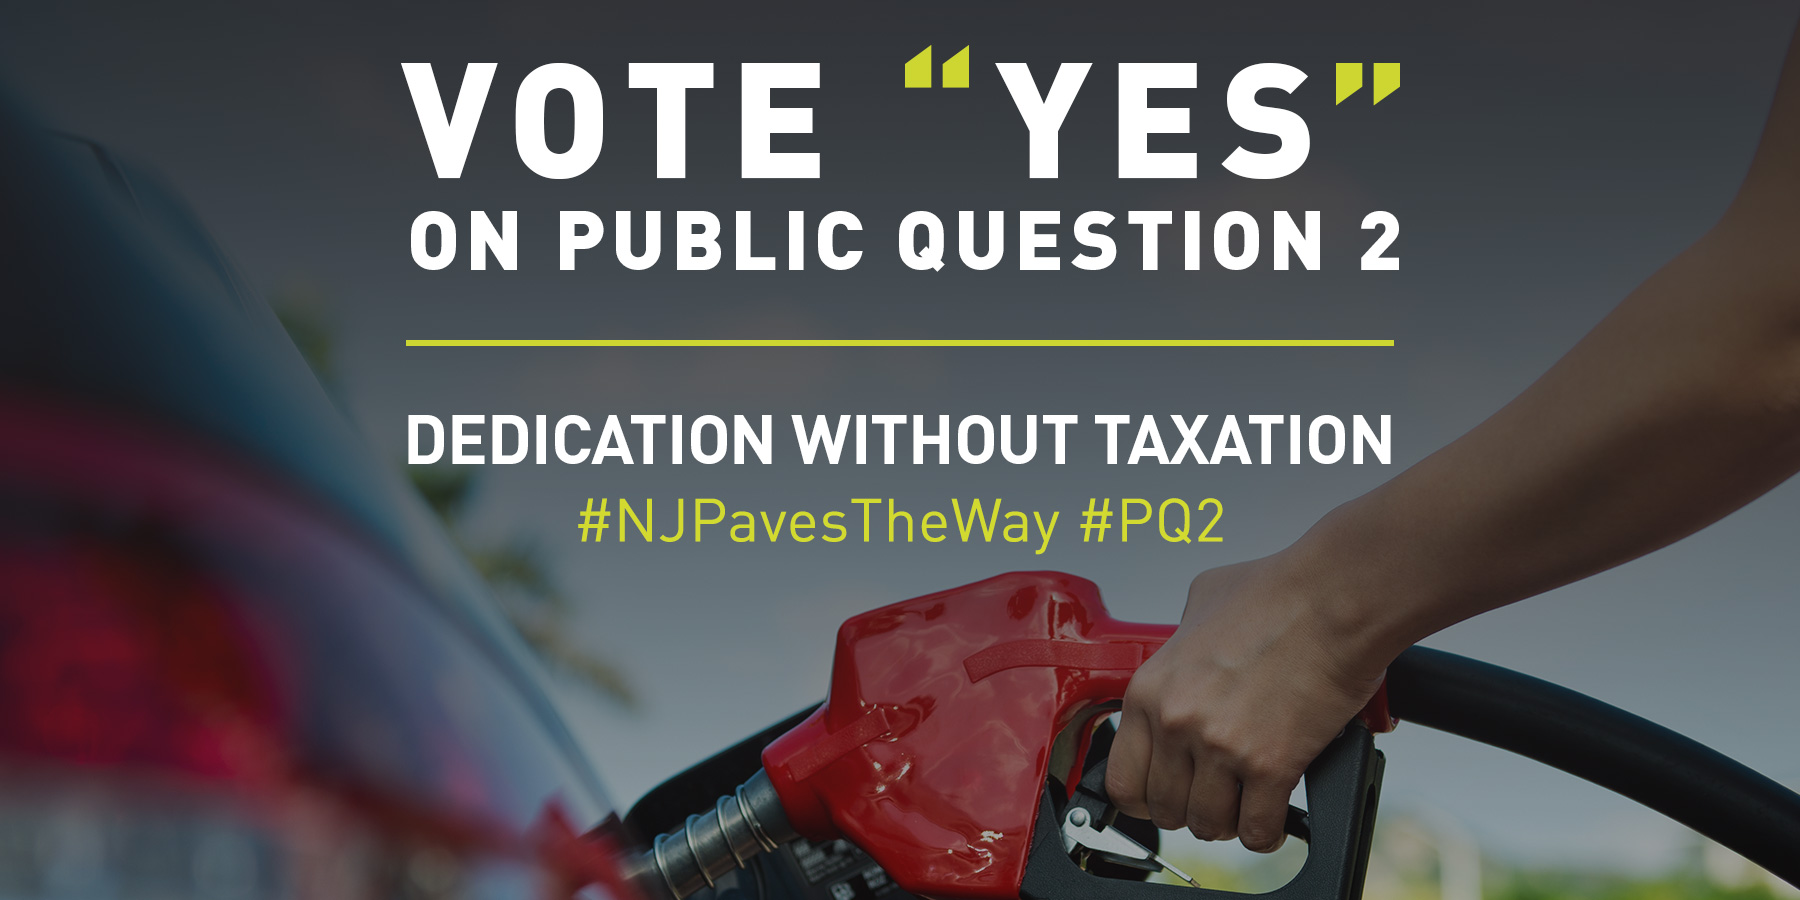 A “YES” Vote on Public Question #2 on November 8th will guarantee that all revenue from the gas tax is constitutionally dedicated to the Transportation Trust Fund (TTF).